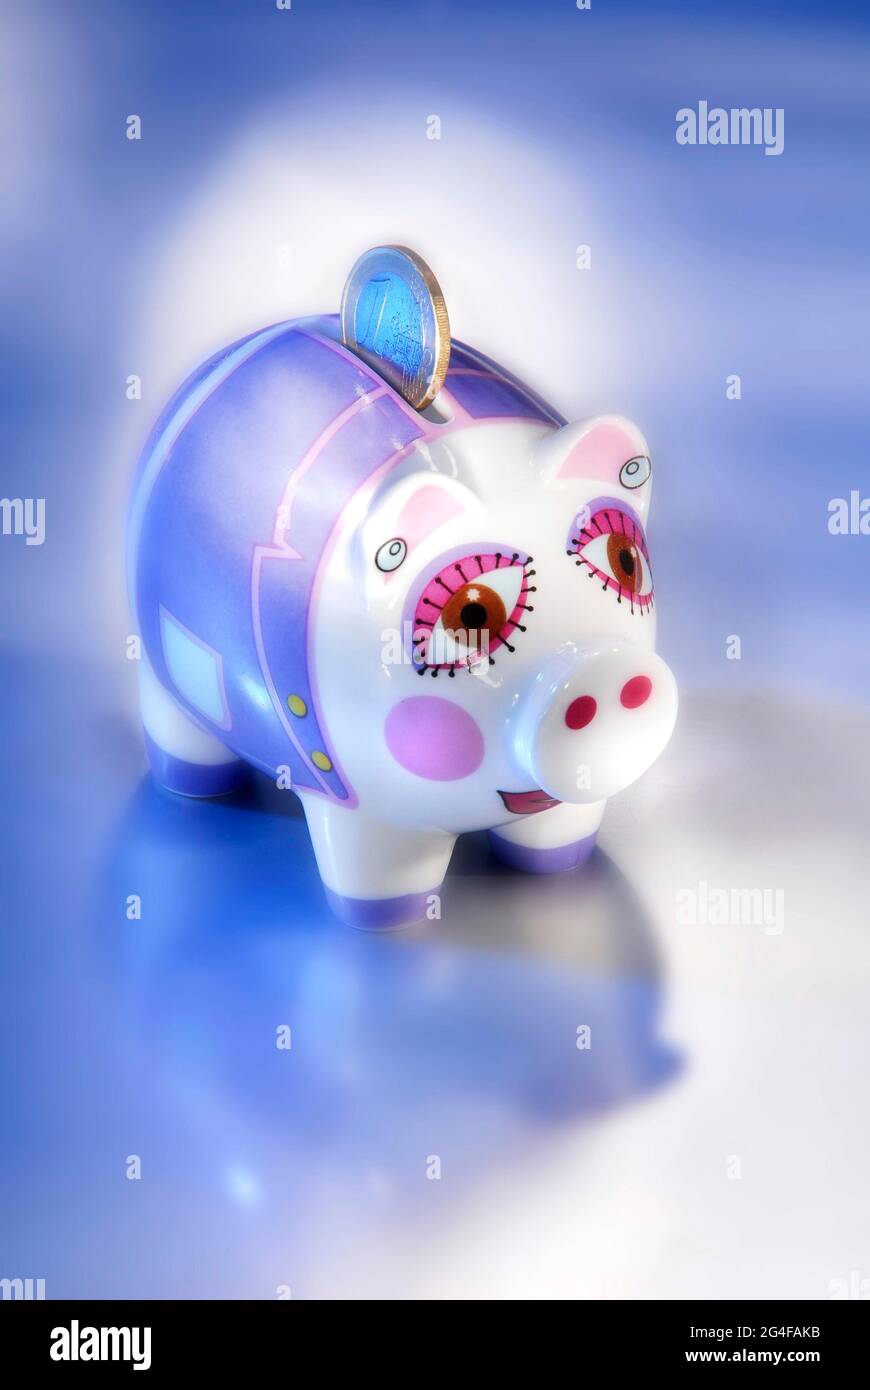 Piggy bank with one euro coin Stock Photo